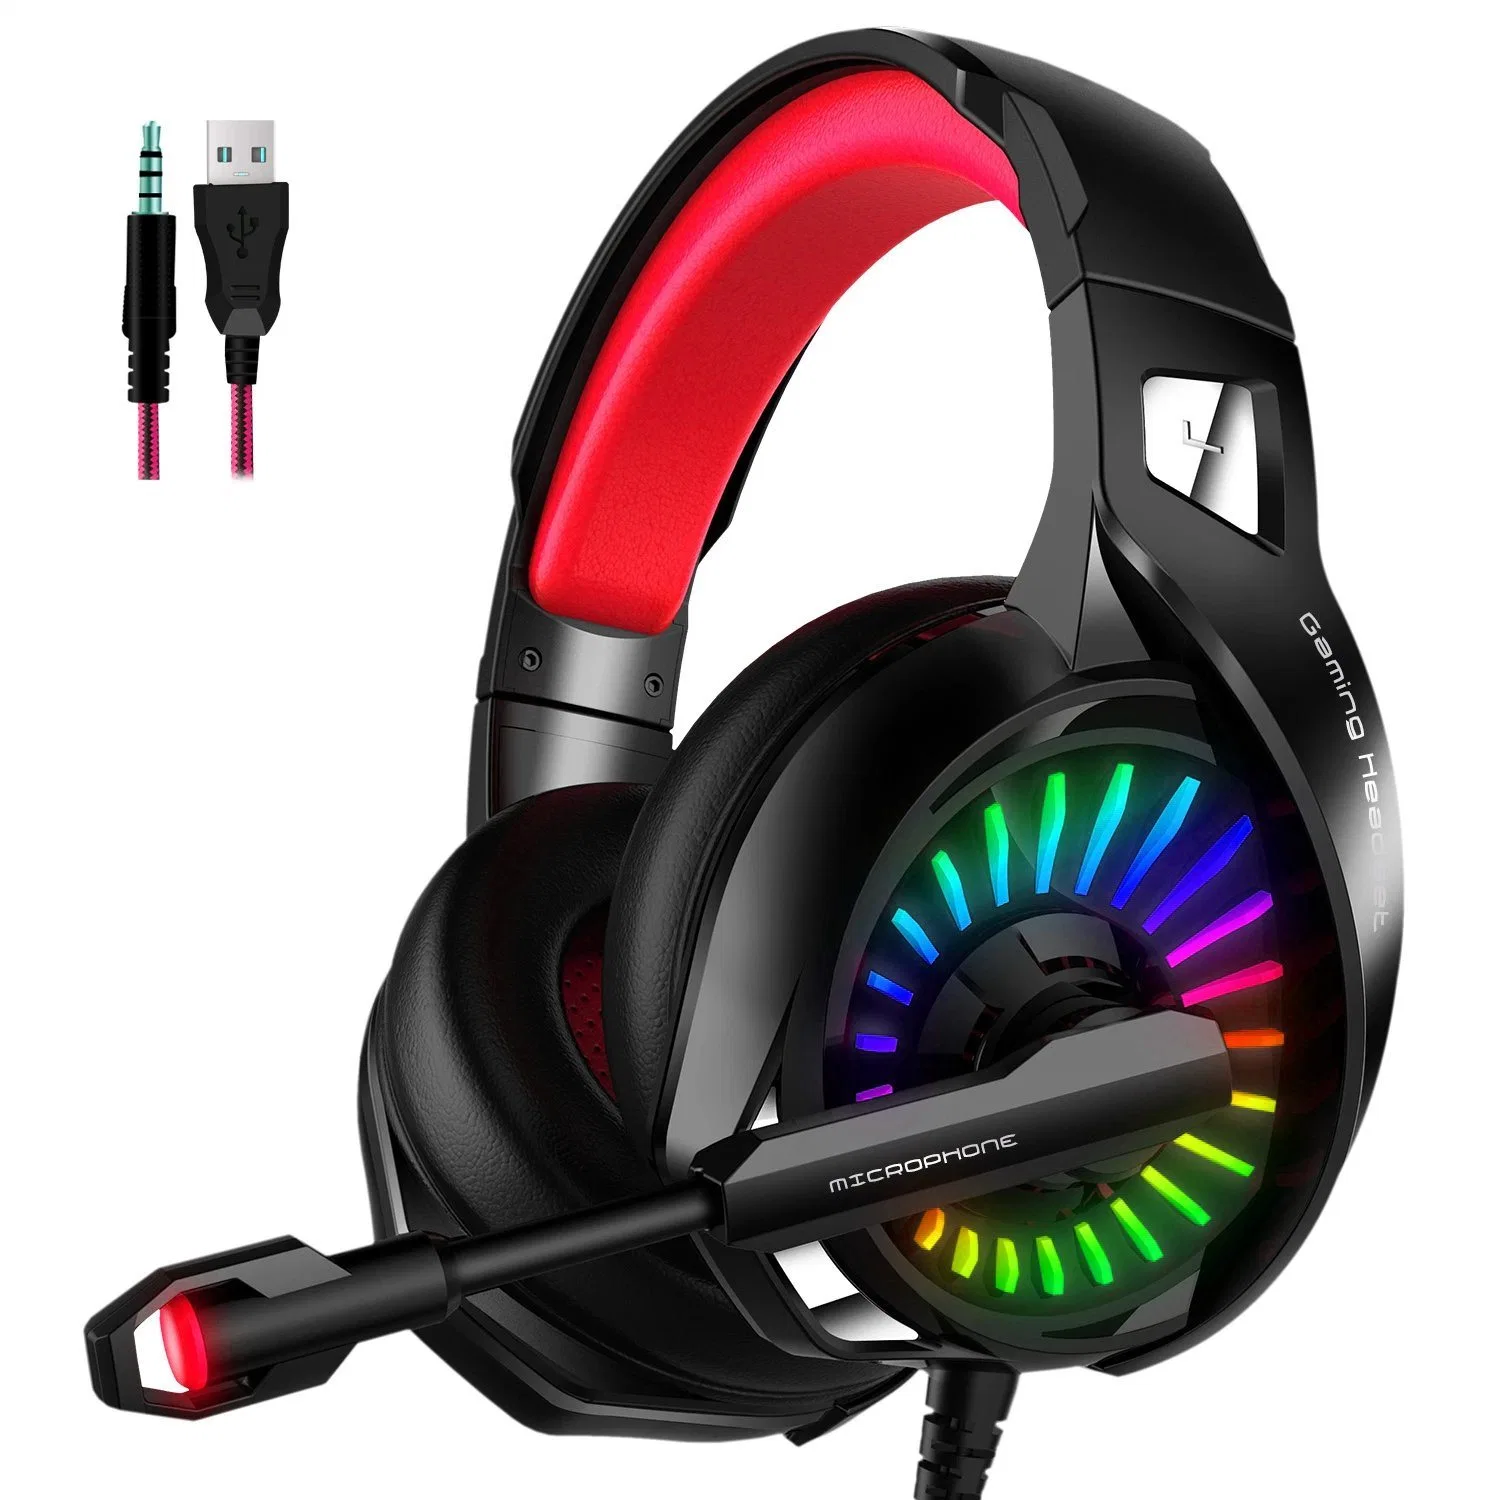 50mm Driver RGB Light PRO Home Audio 3D Surround PC Game Headset Computer Headphone PS4 PS5 xBox Gaming Headphone with Mute and Mic